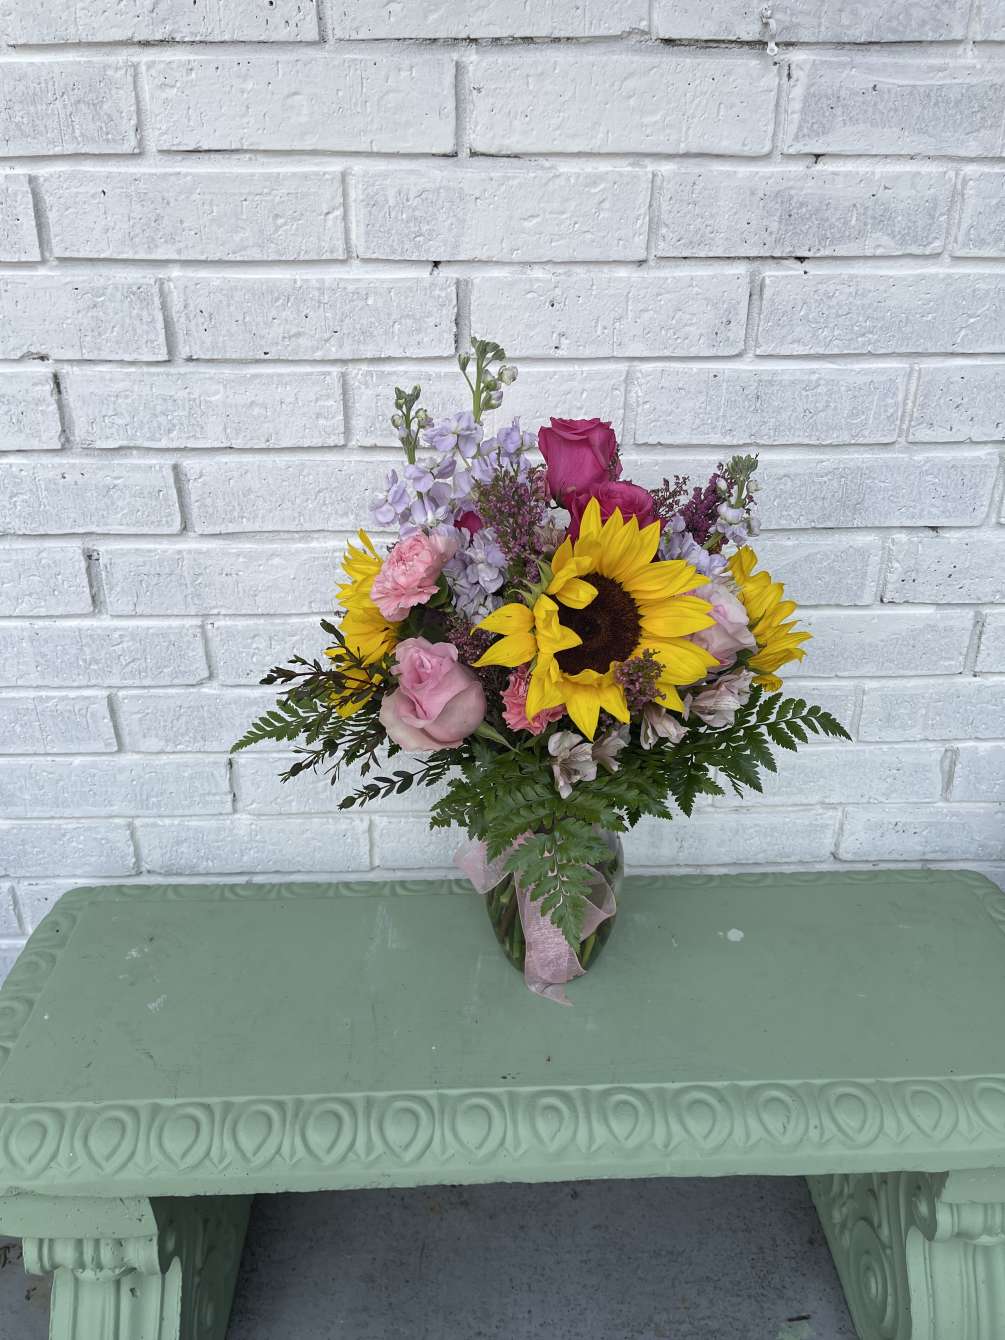 Mixed floral with sunflowers, roses, and a variety of filler flowers paired